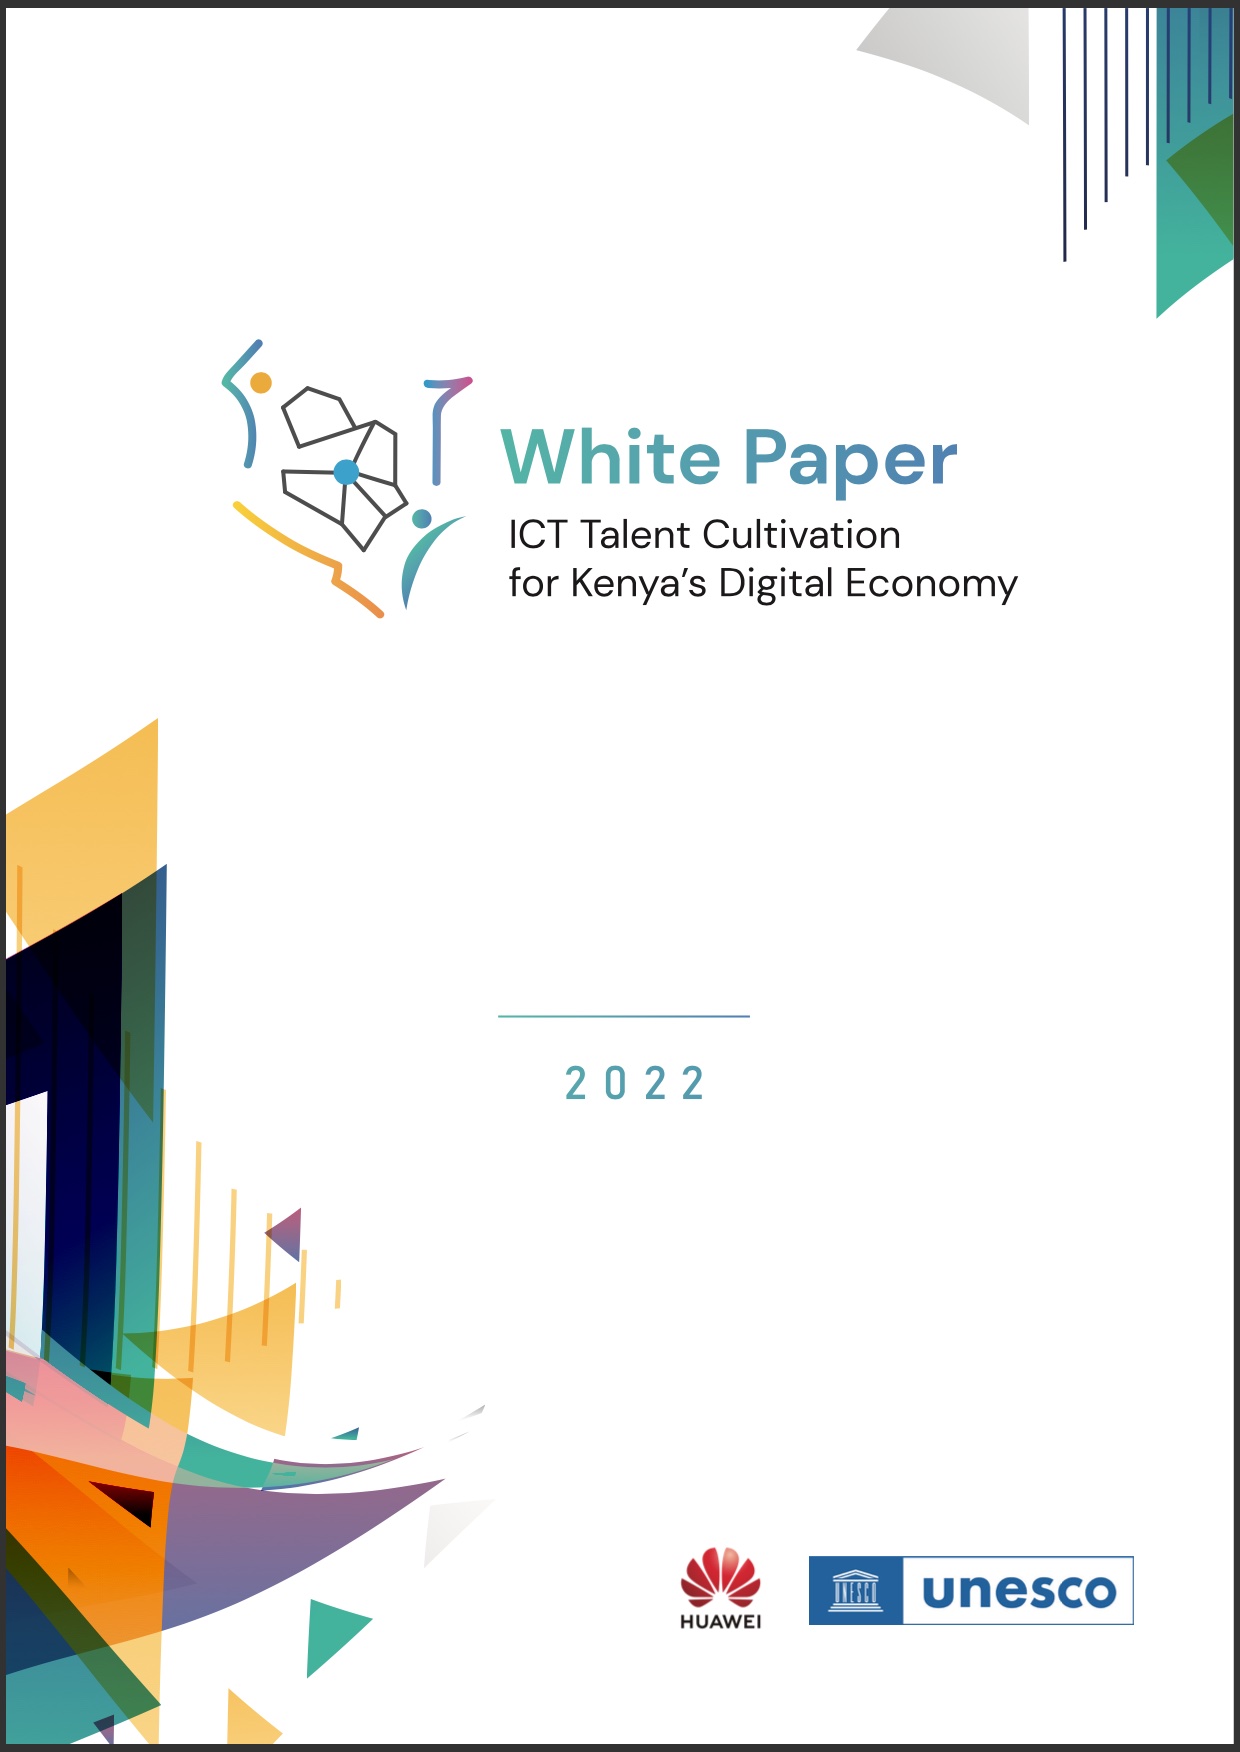 White Paper - ICT Talent Cultivation for Kenya's Digital Economy